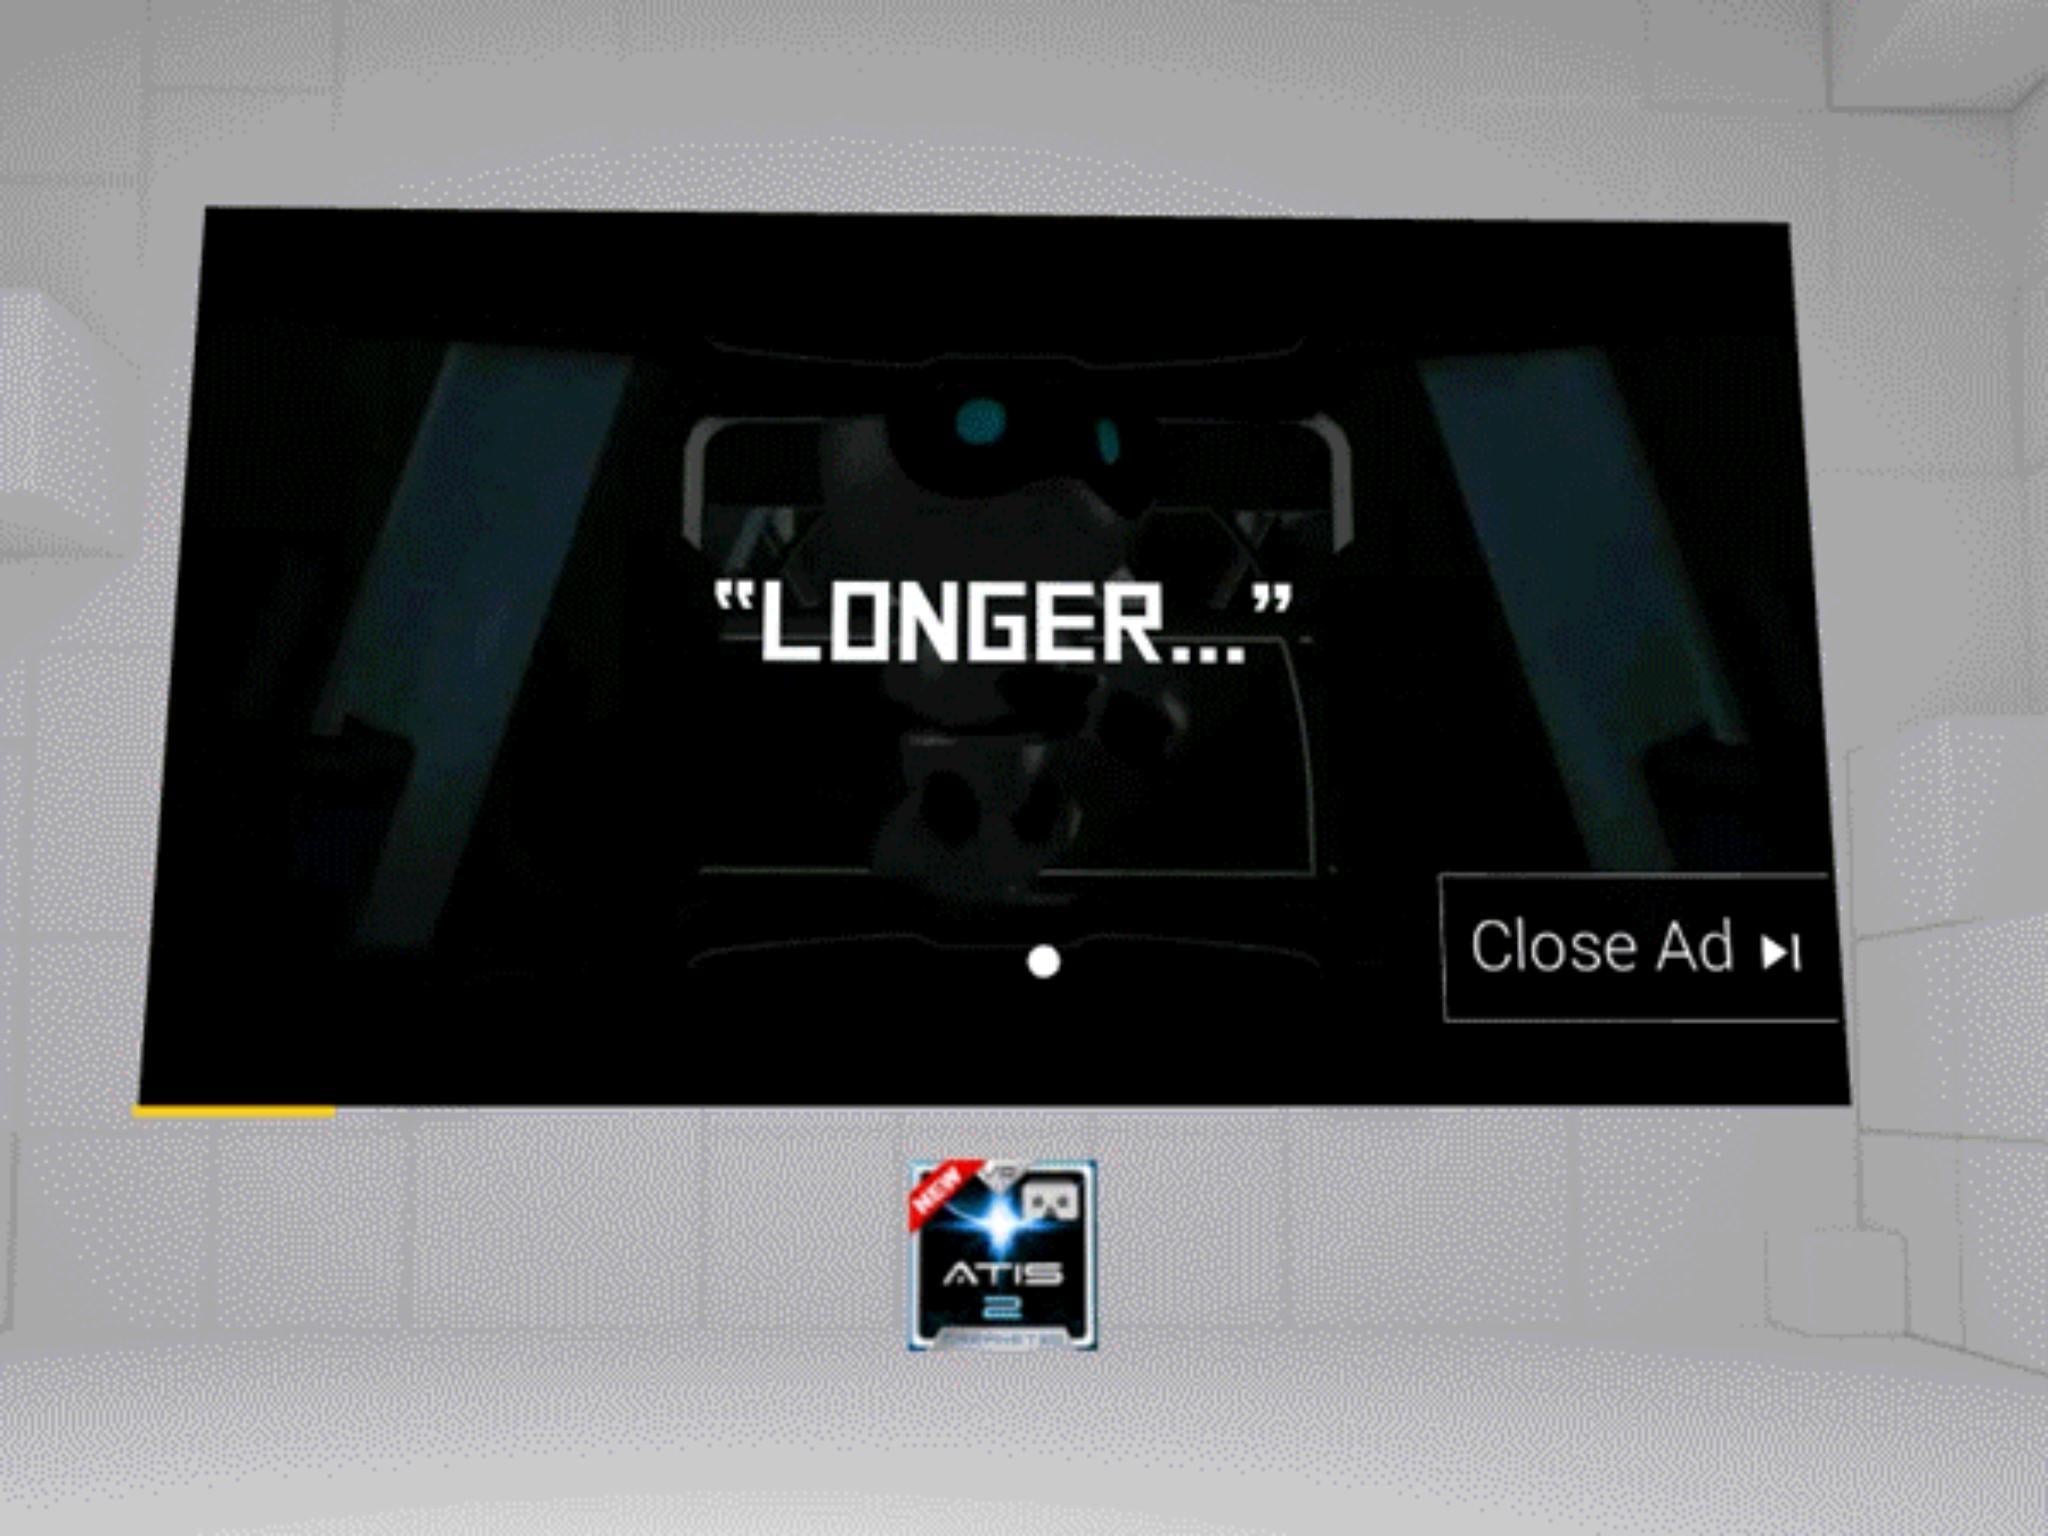 You’ll be able to both launch and skip adverts with your eyes